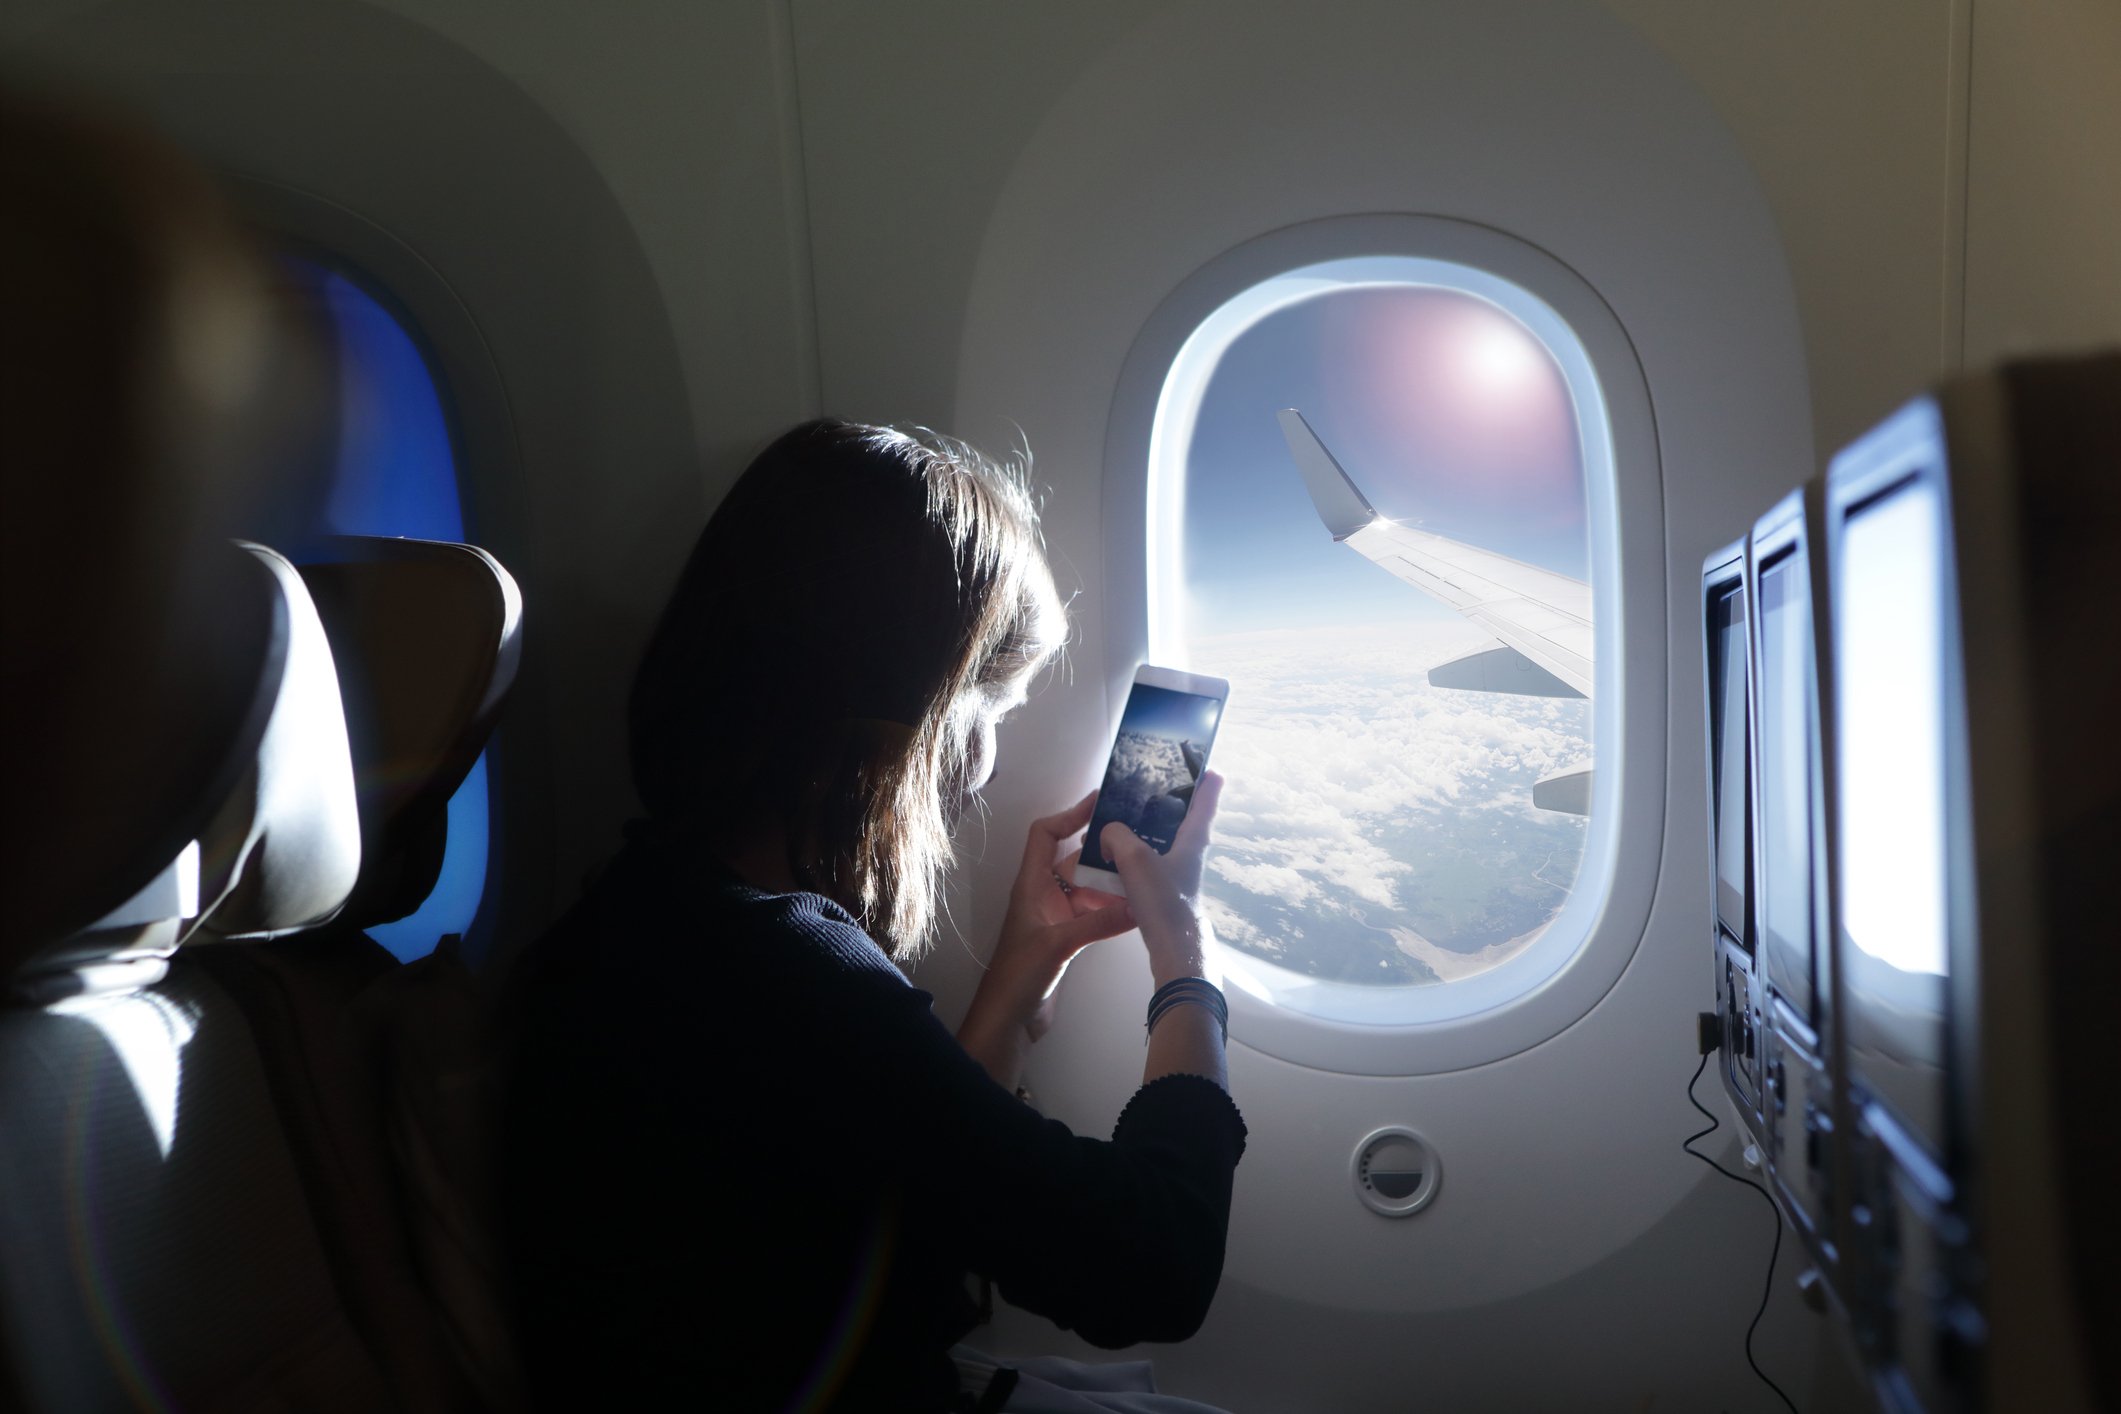 Girl taking photo out of airplane window | Photo: Getty Images